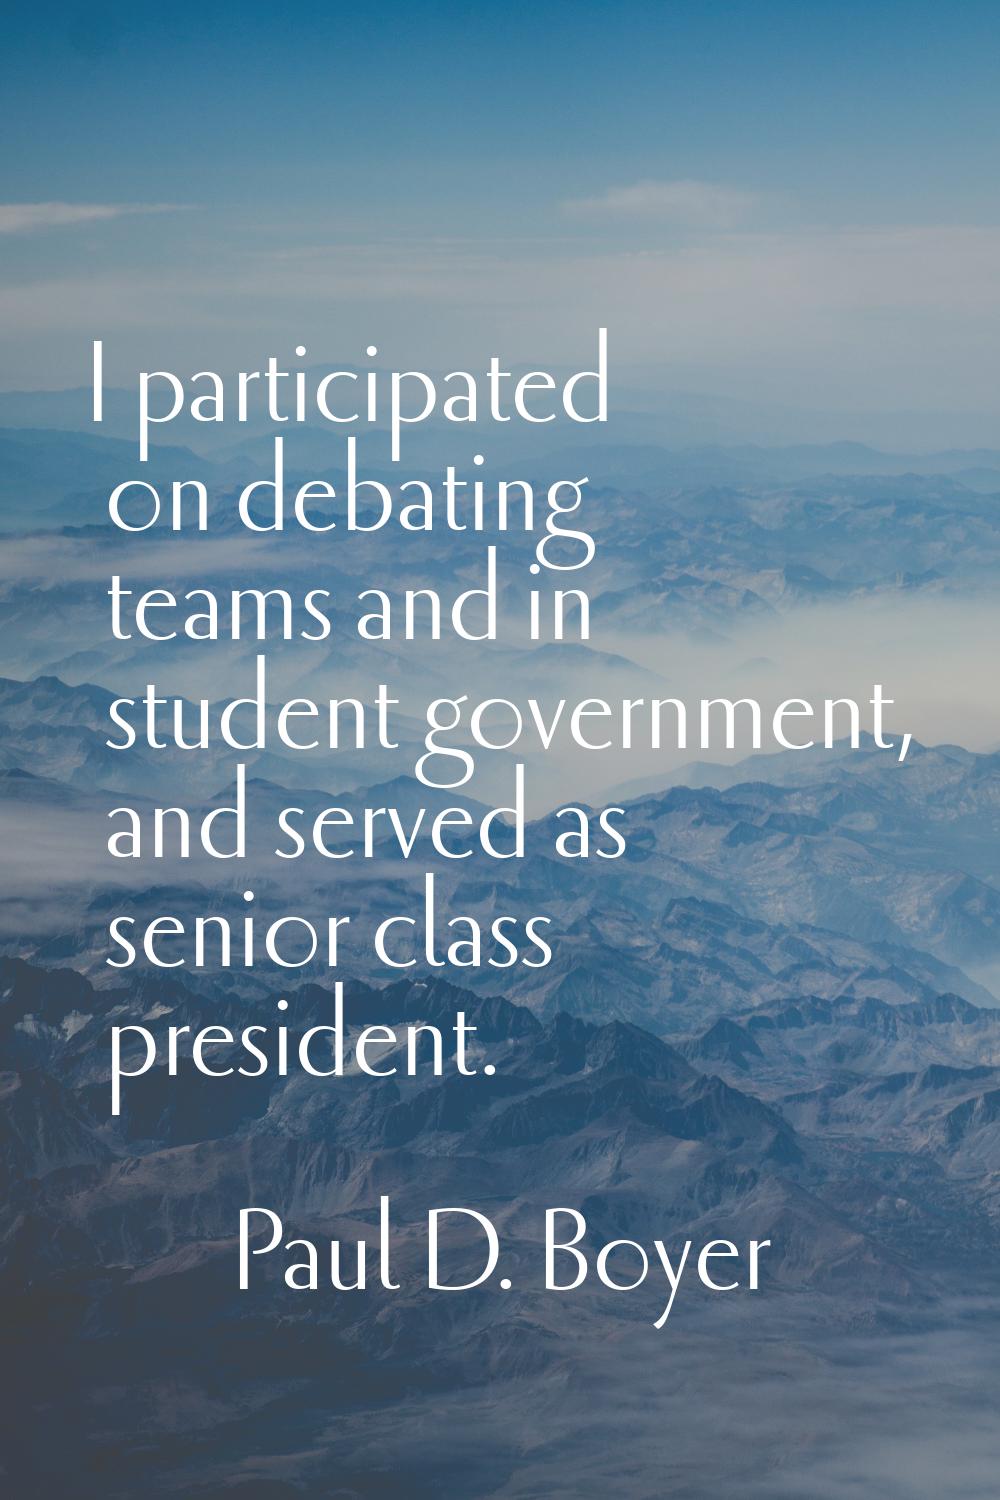 I participated on debating teams and in student government, and served as senior class president.